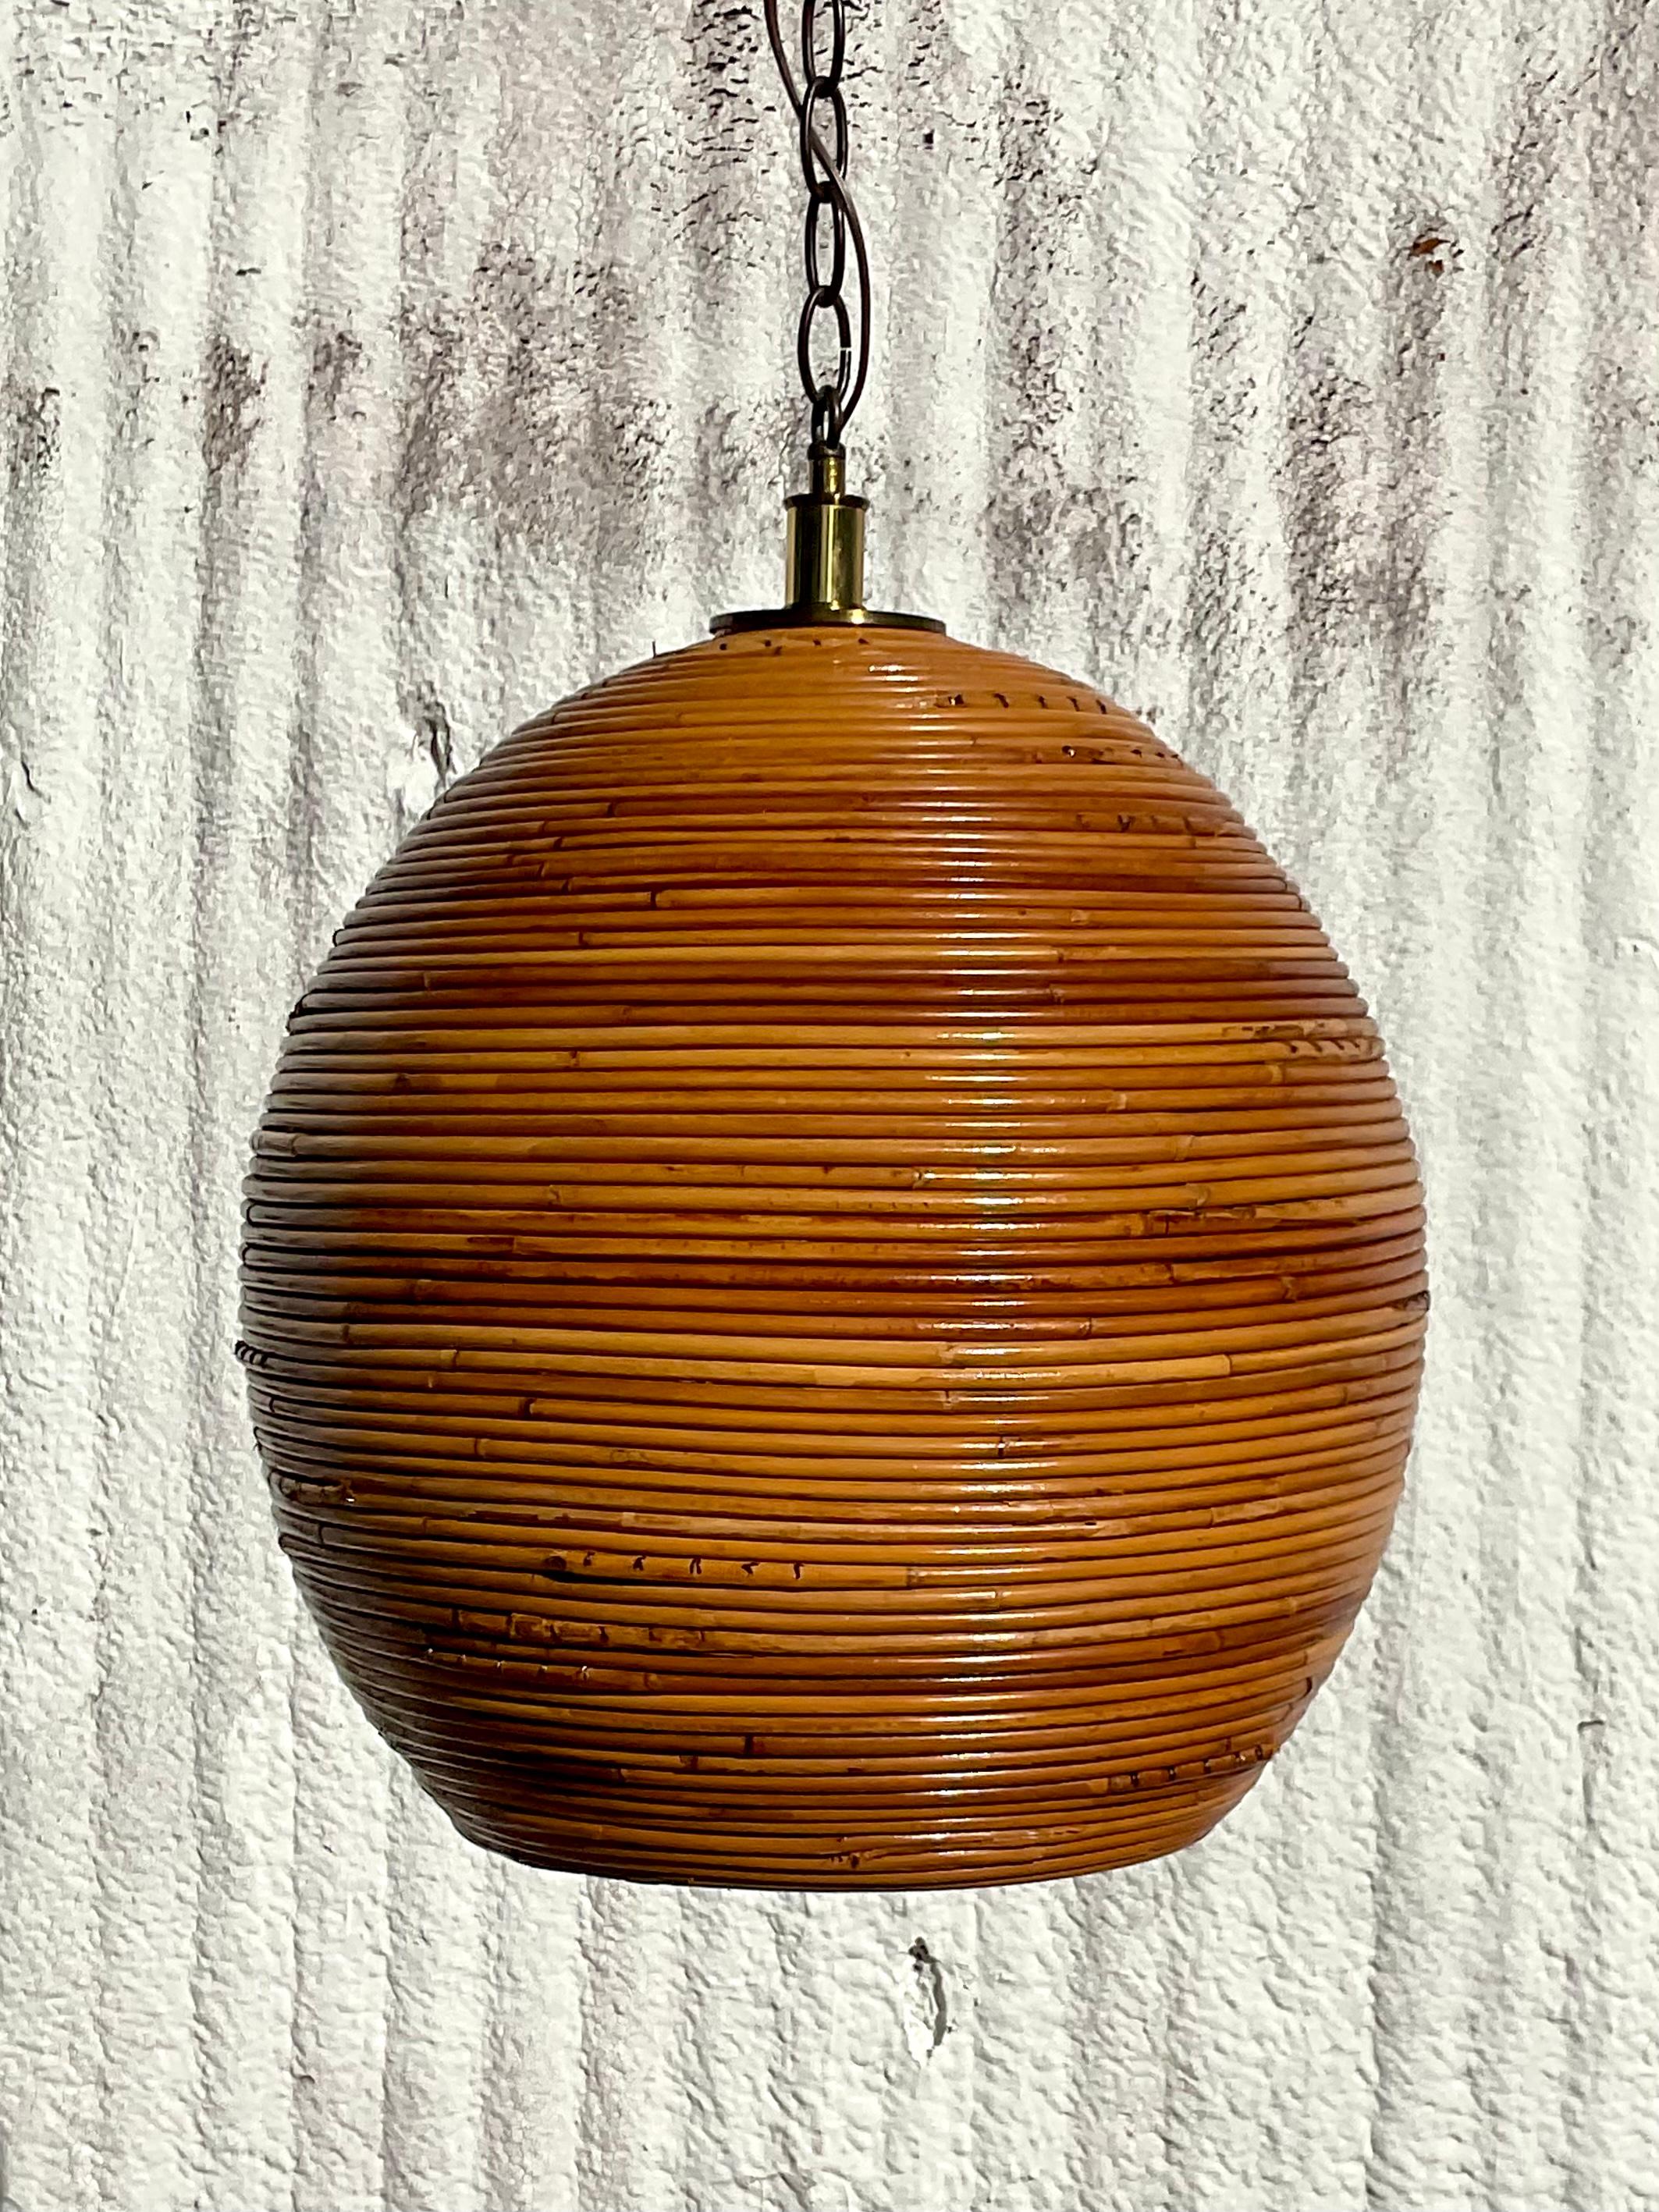 Fantastic organic modern hanging lamp. Beautiful coiled pencil reed in a chic hive shape. Minor scuffs and blemishes appropriate to its age and use. Acquired from a Palm Beach estate.